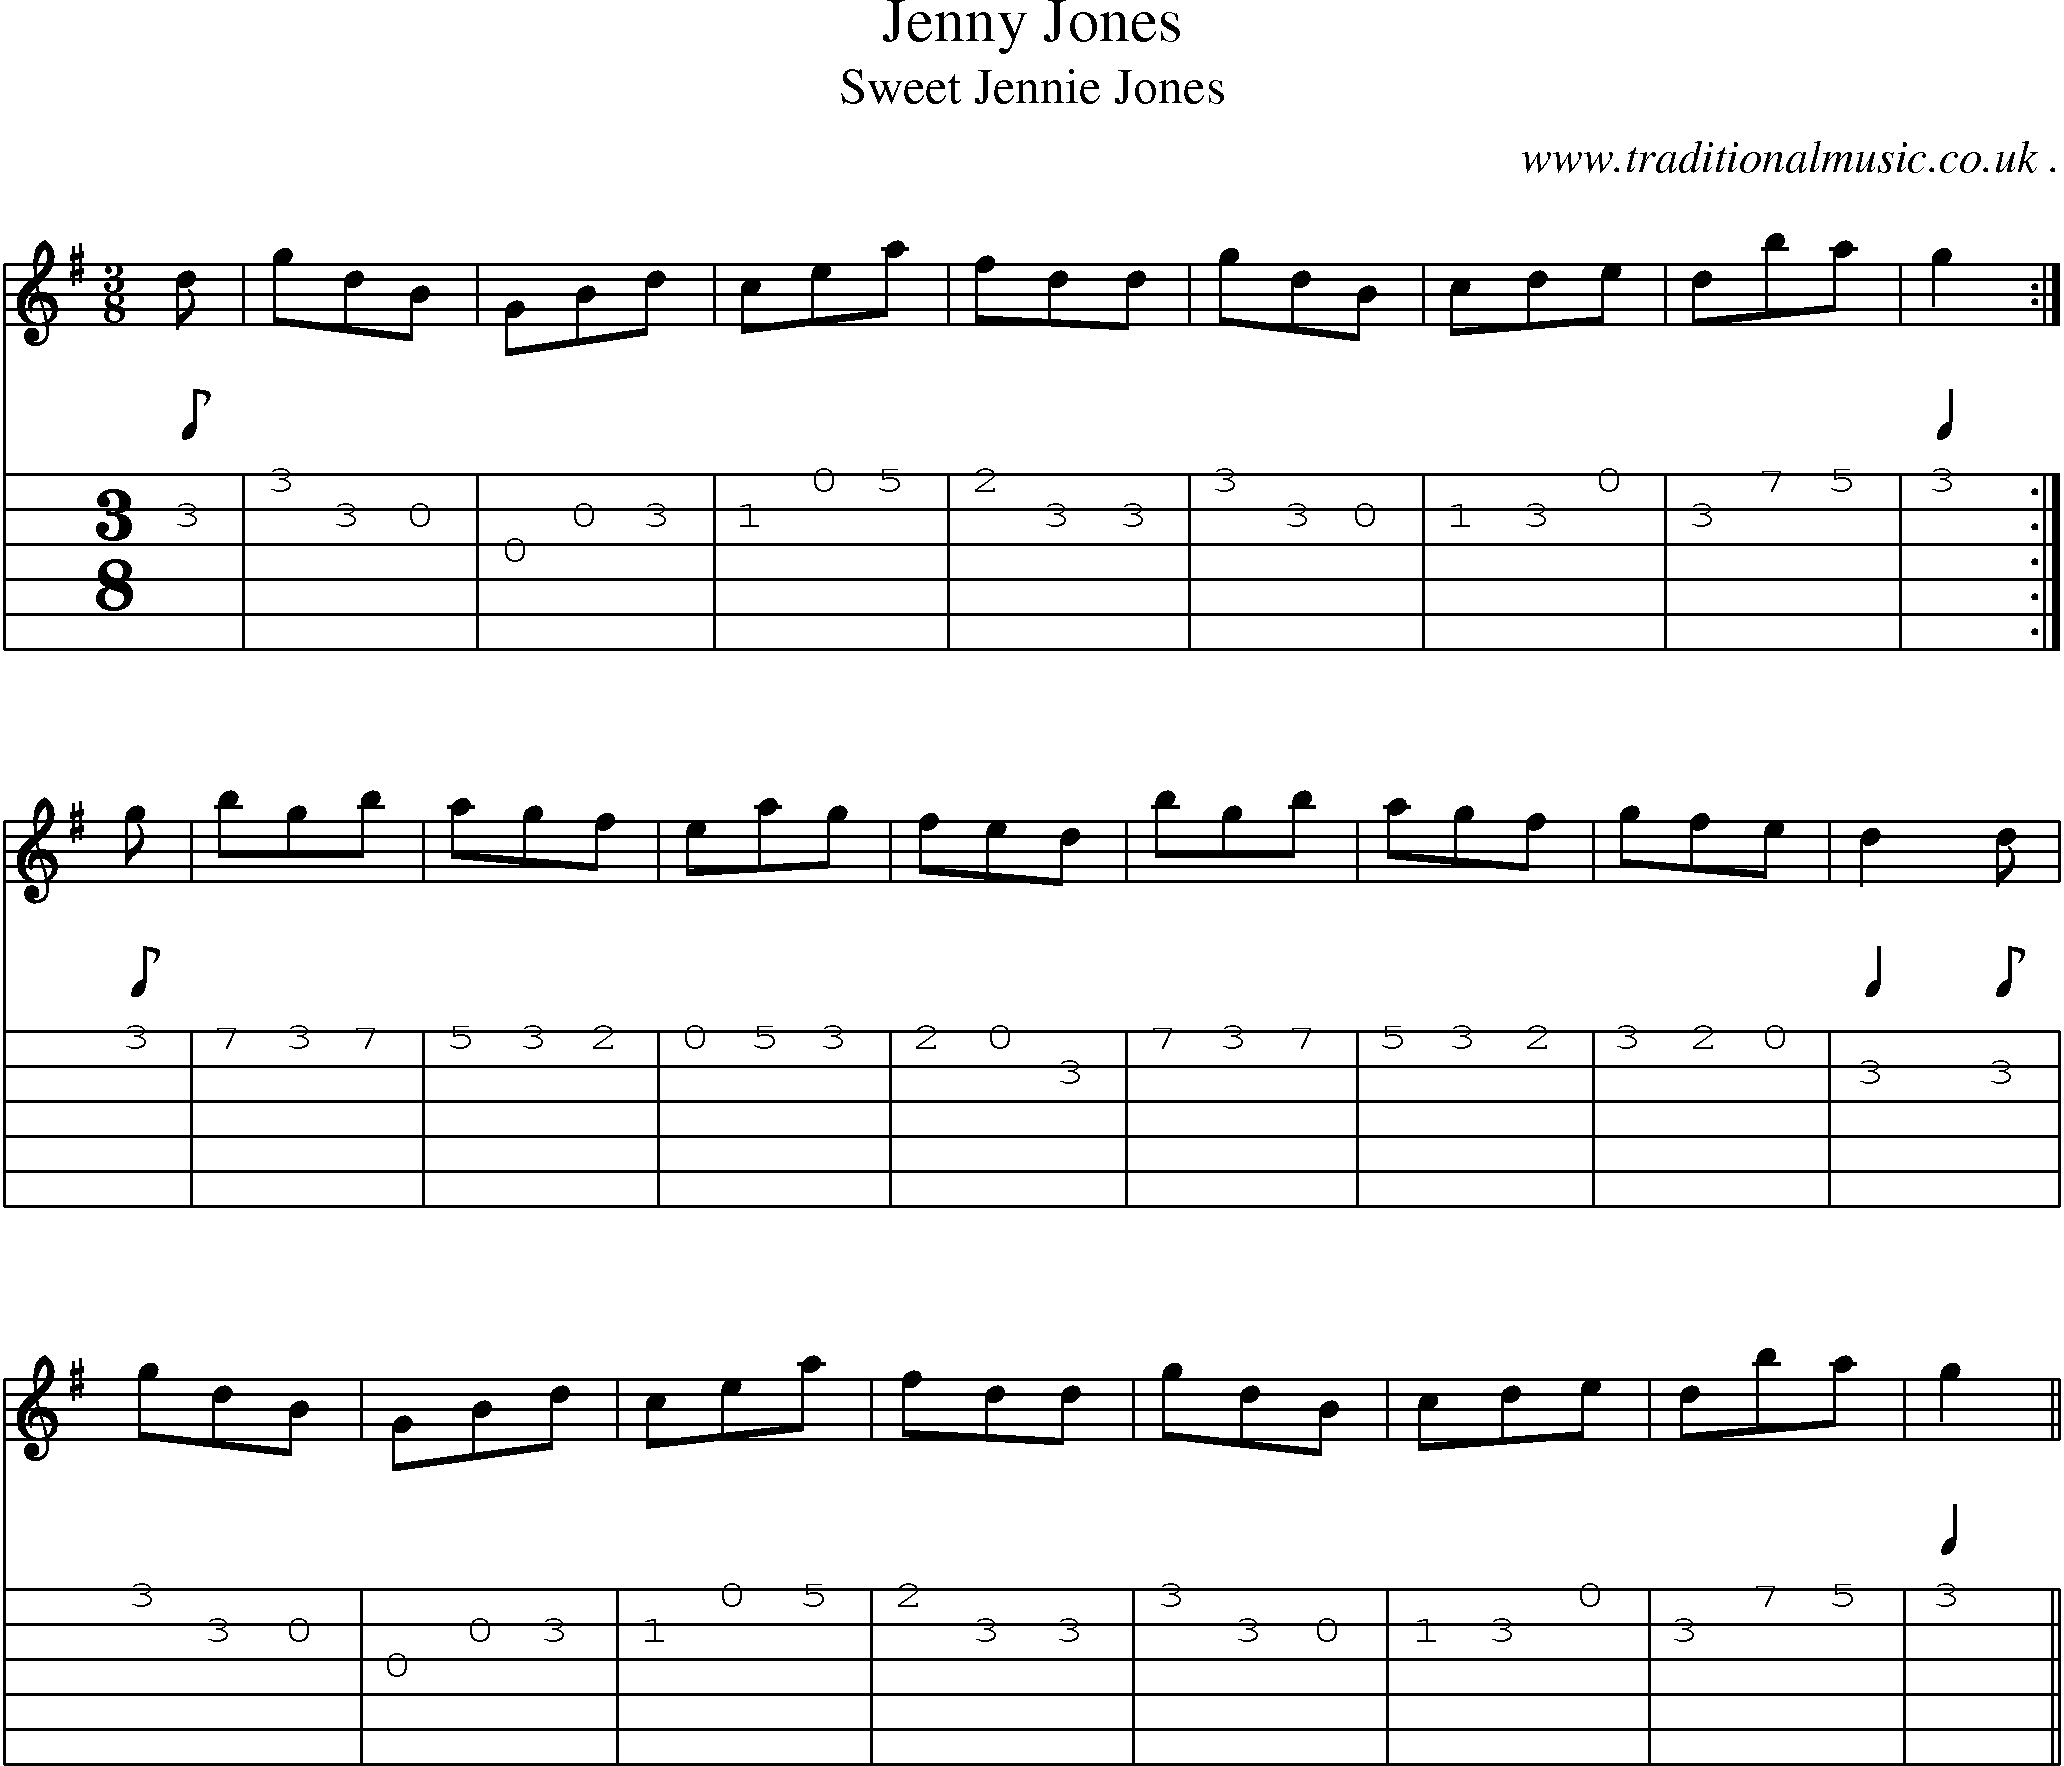 Sheet-Music and Guitar Tabs for Jenny Jones